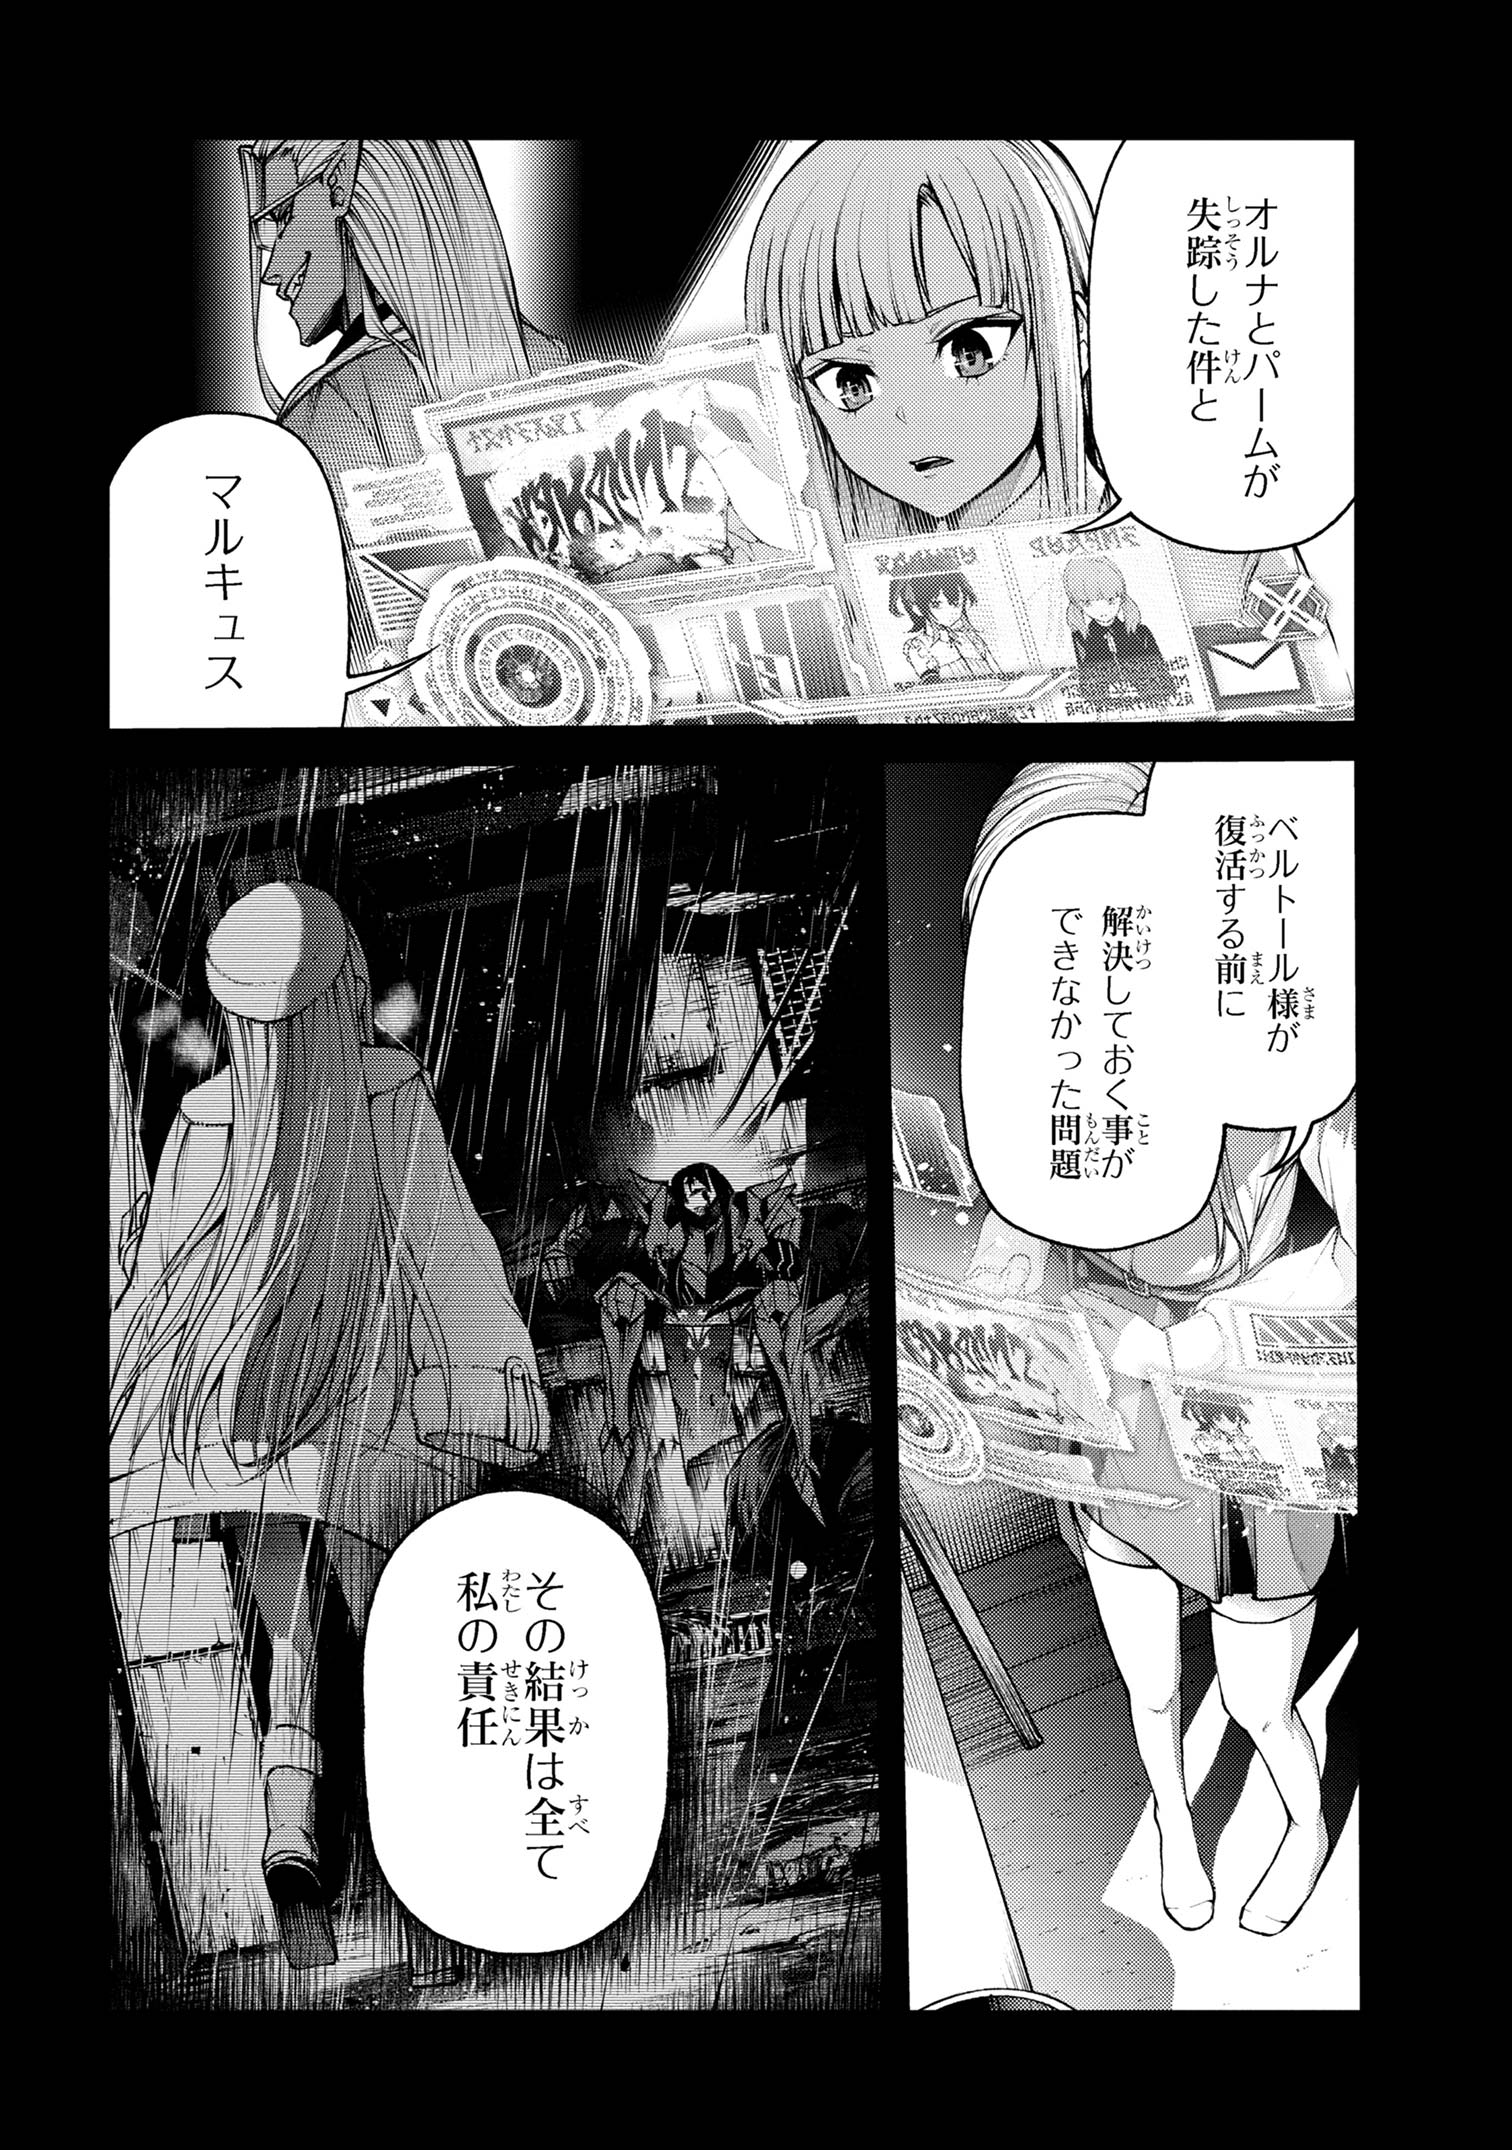 Maou 2099 - Chapter 8.1 - Page 4